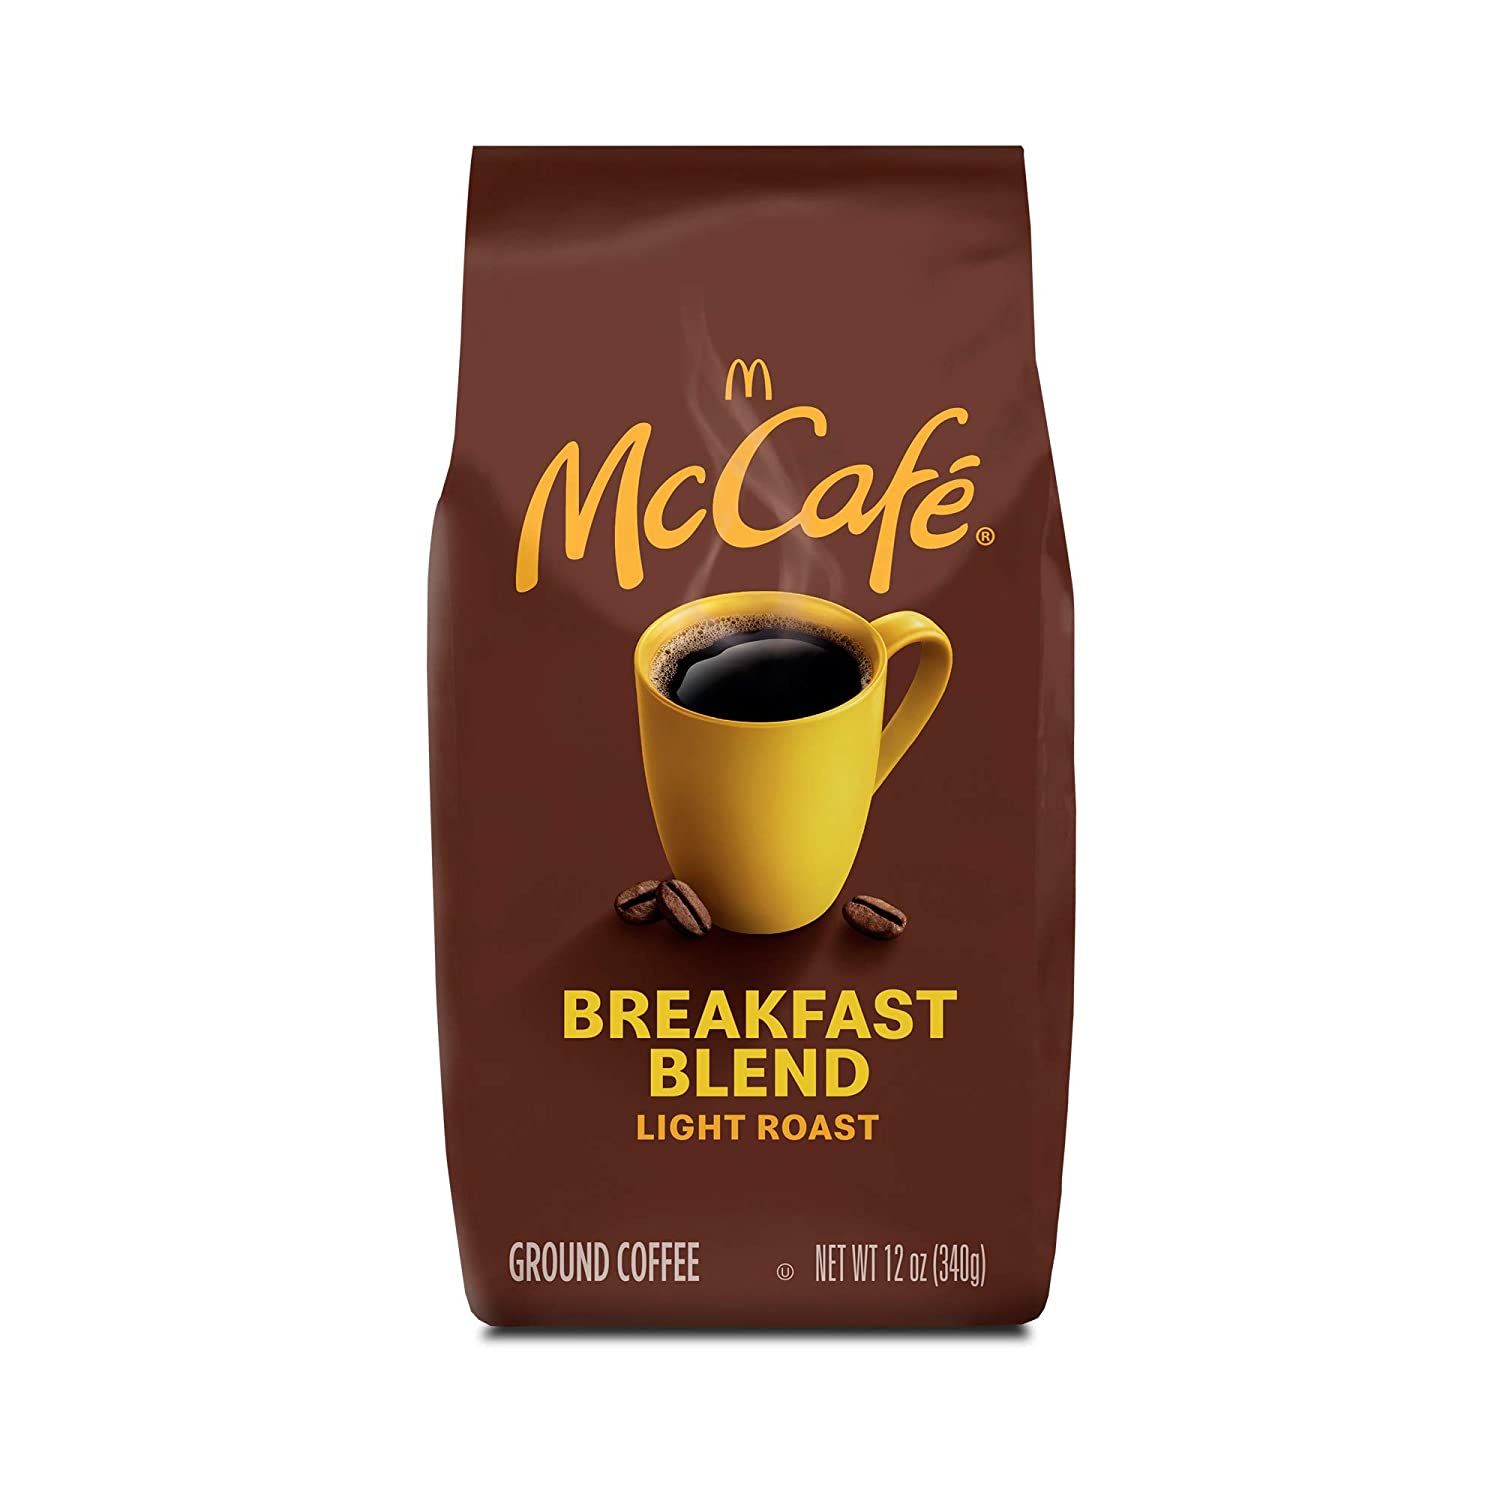 12-Oz McCafe Breakfast Blend Ground Coffee (Light Roast) $3.44 w/ S&S + Free Shipping w/ Prime or on orders over $35